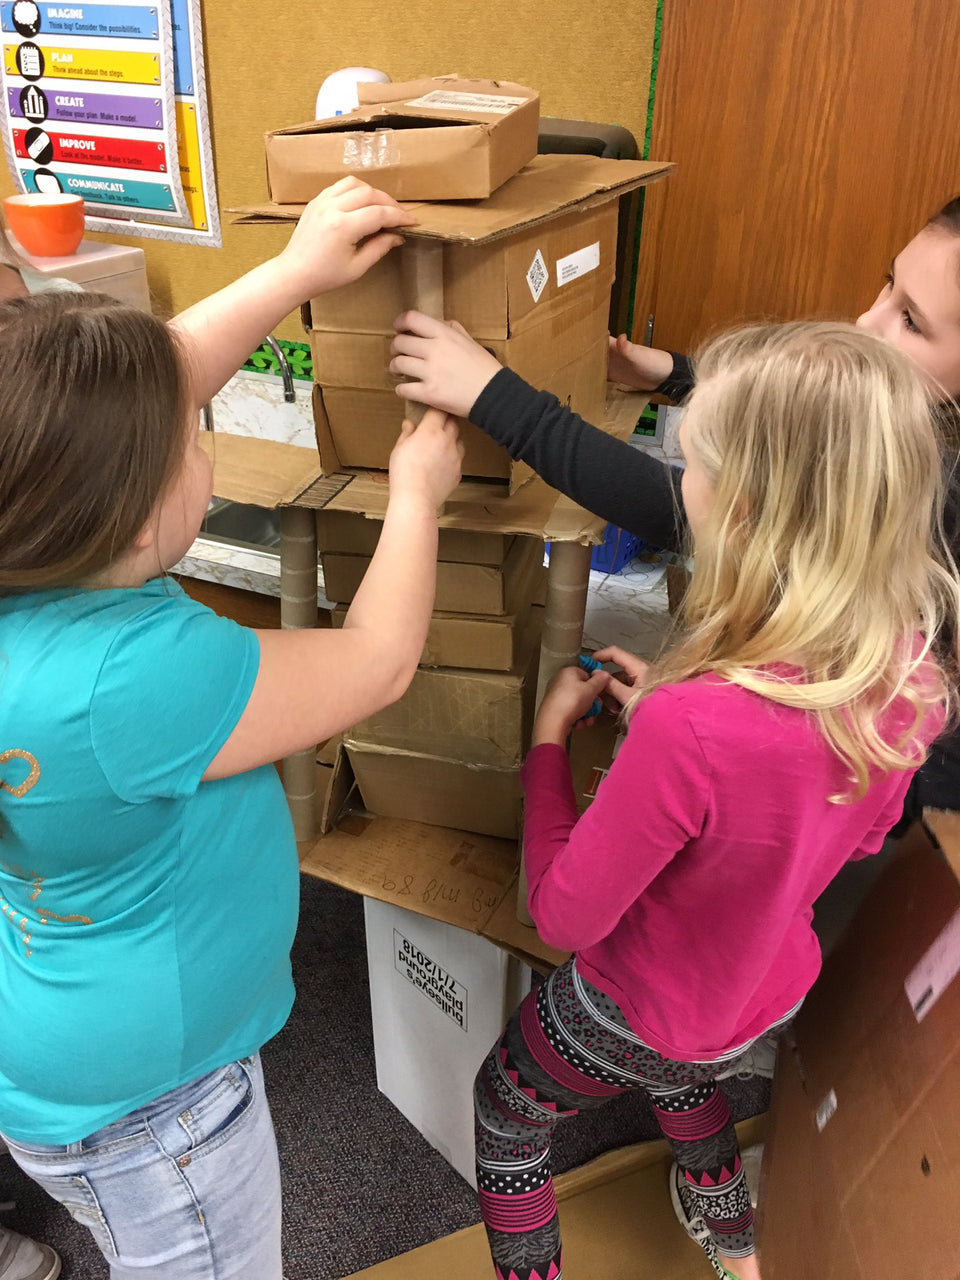 Cardboard challenge - which team can build the tallest tower with Makedo 